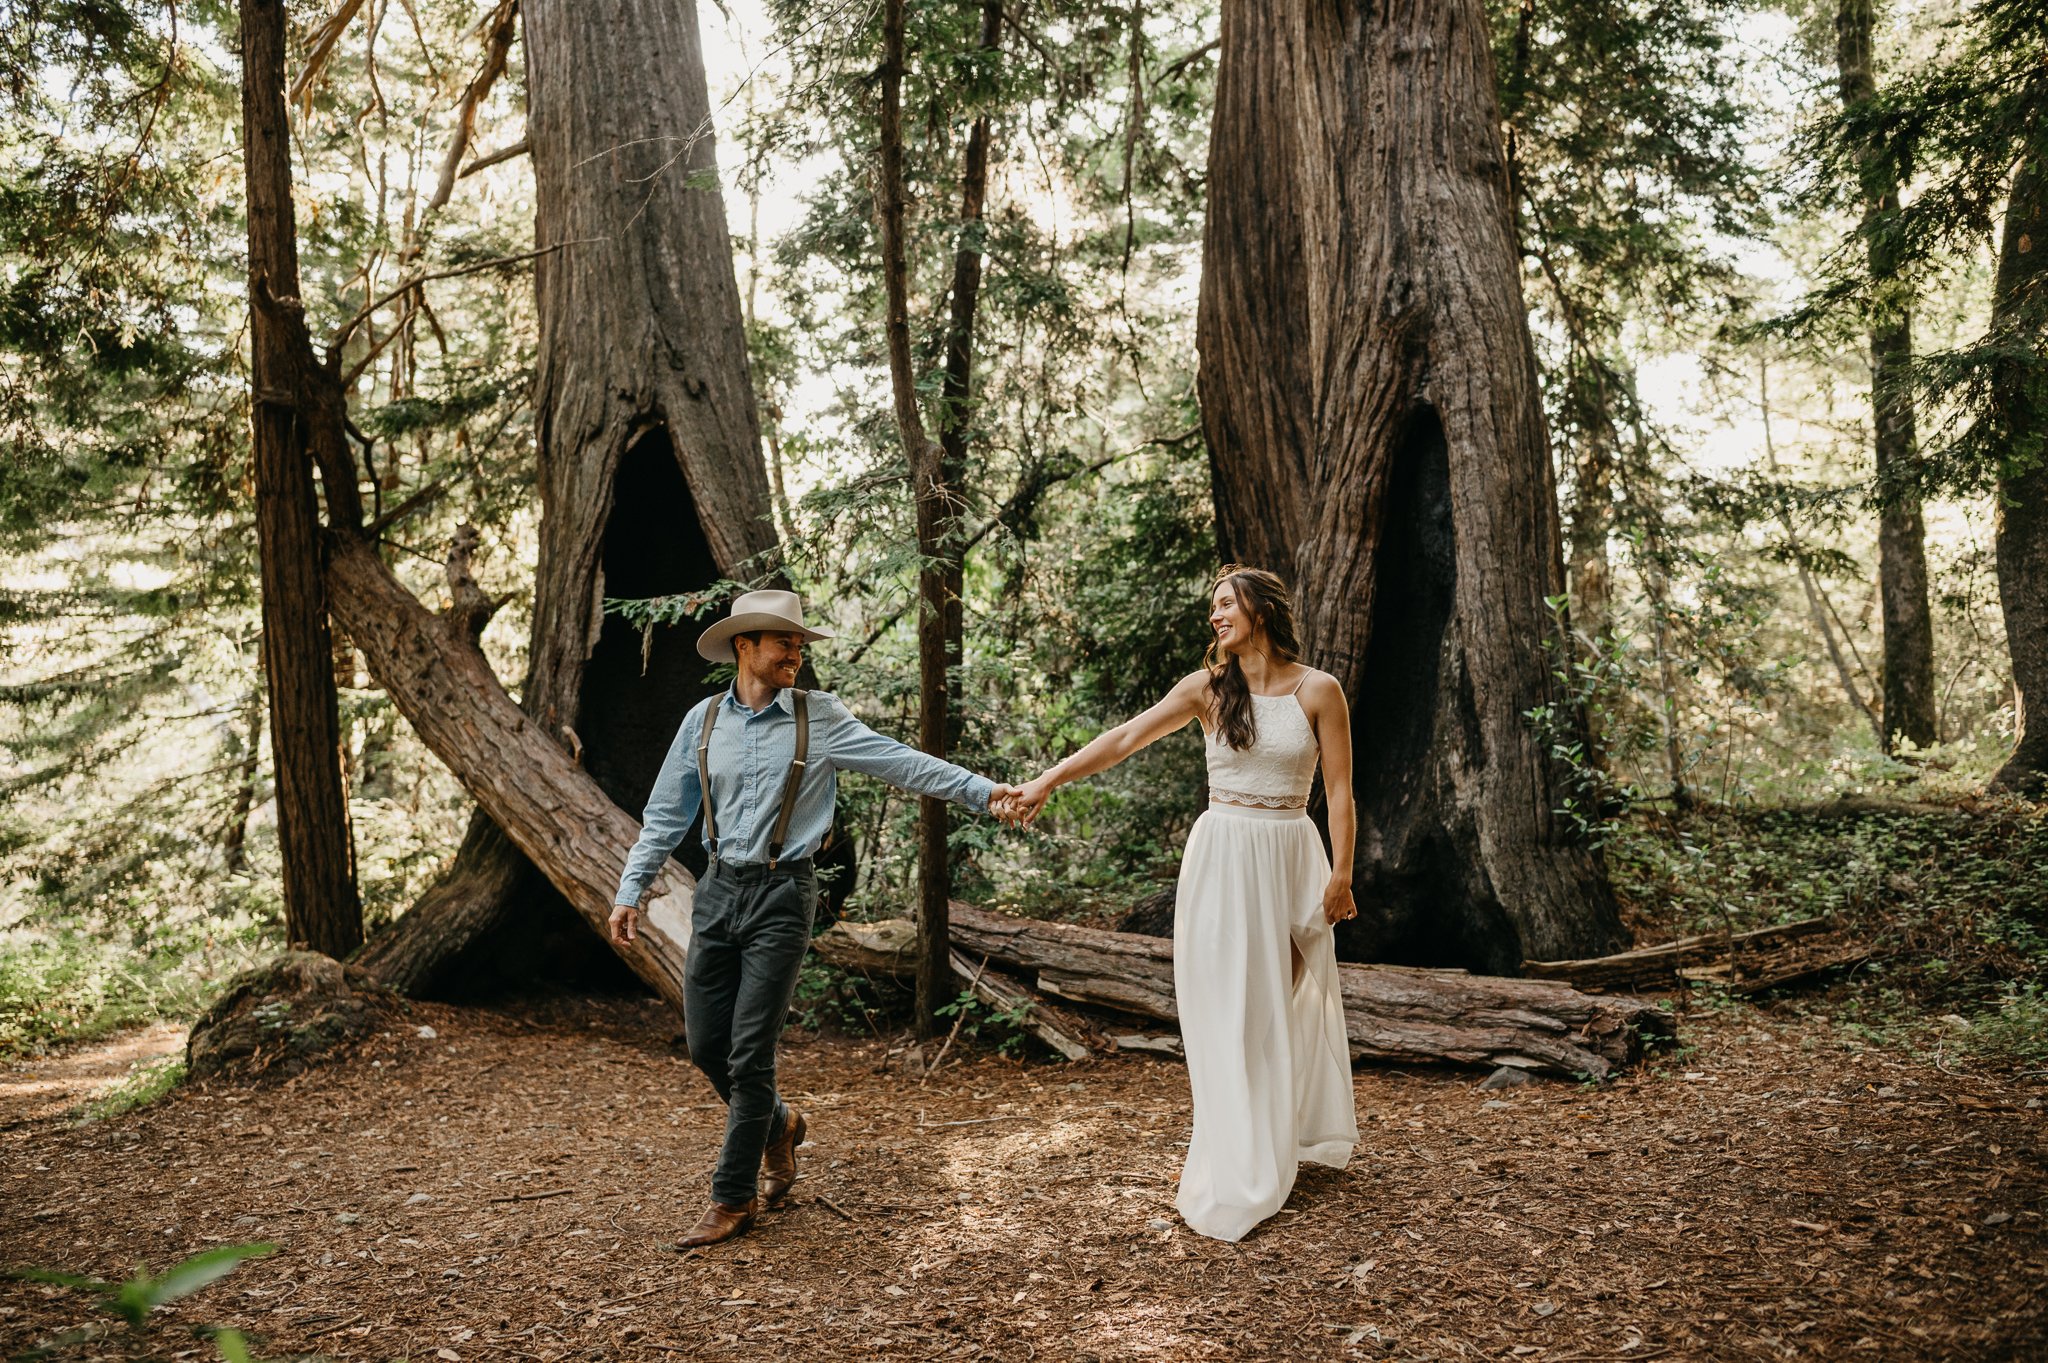 Big Sur Engagement couple in forest holding hands walking under redwoods she in long white sleeveless dress and he is in a light blue shit and tan pants and cowboy hat